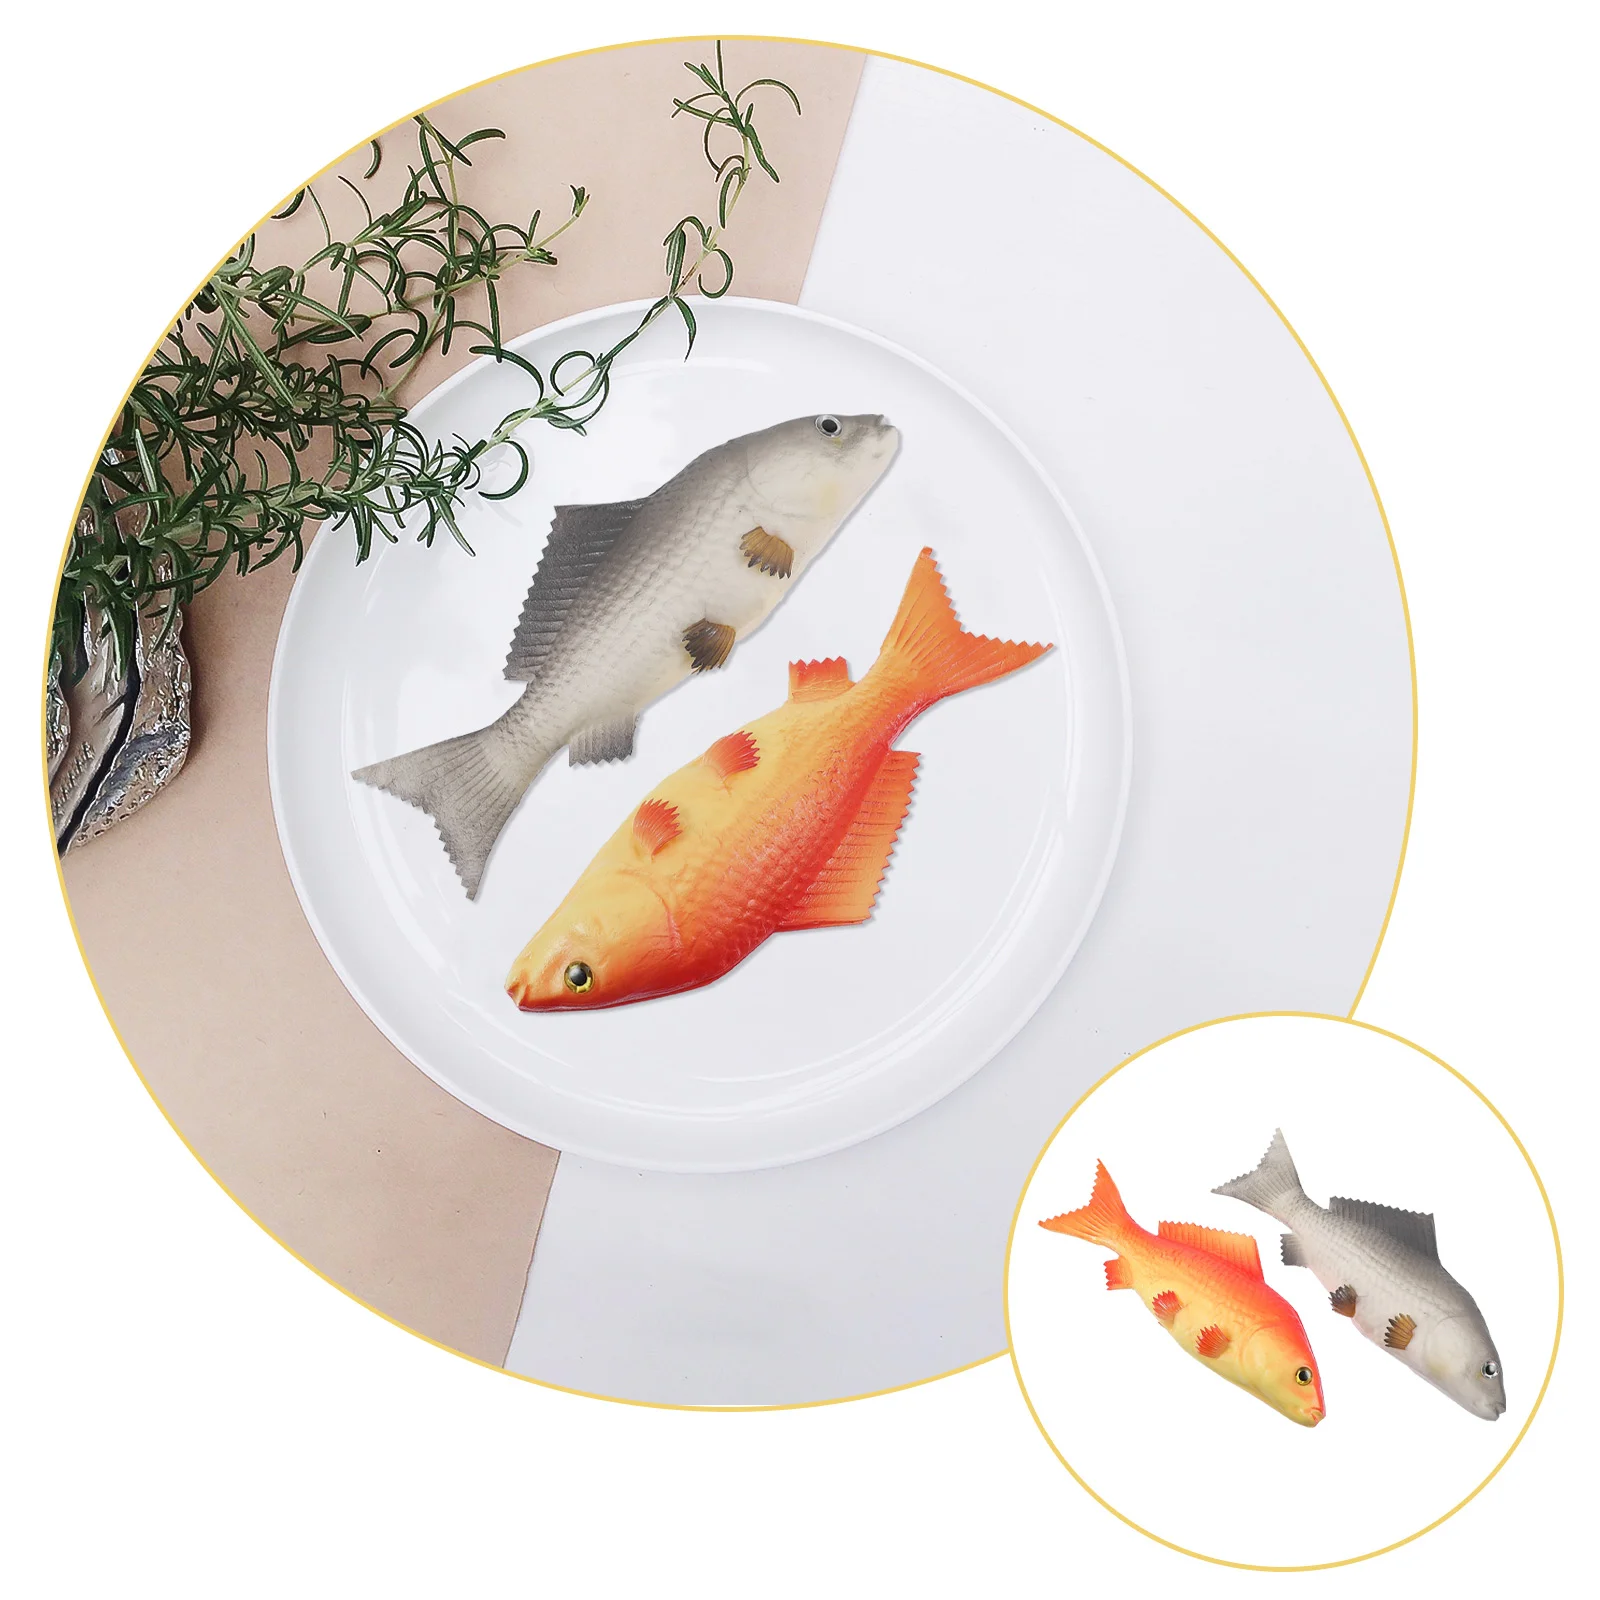 

2Pcs Simulated Model Artificial PU Toys for Kitchen Decoration Home Decoration Store Party Display Kids Teaching Learning Tools